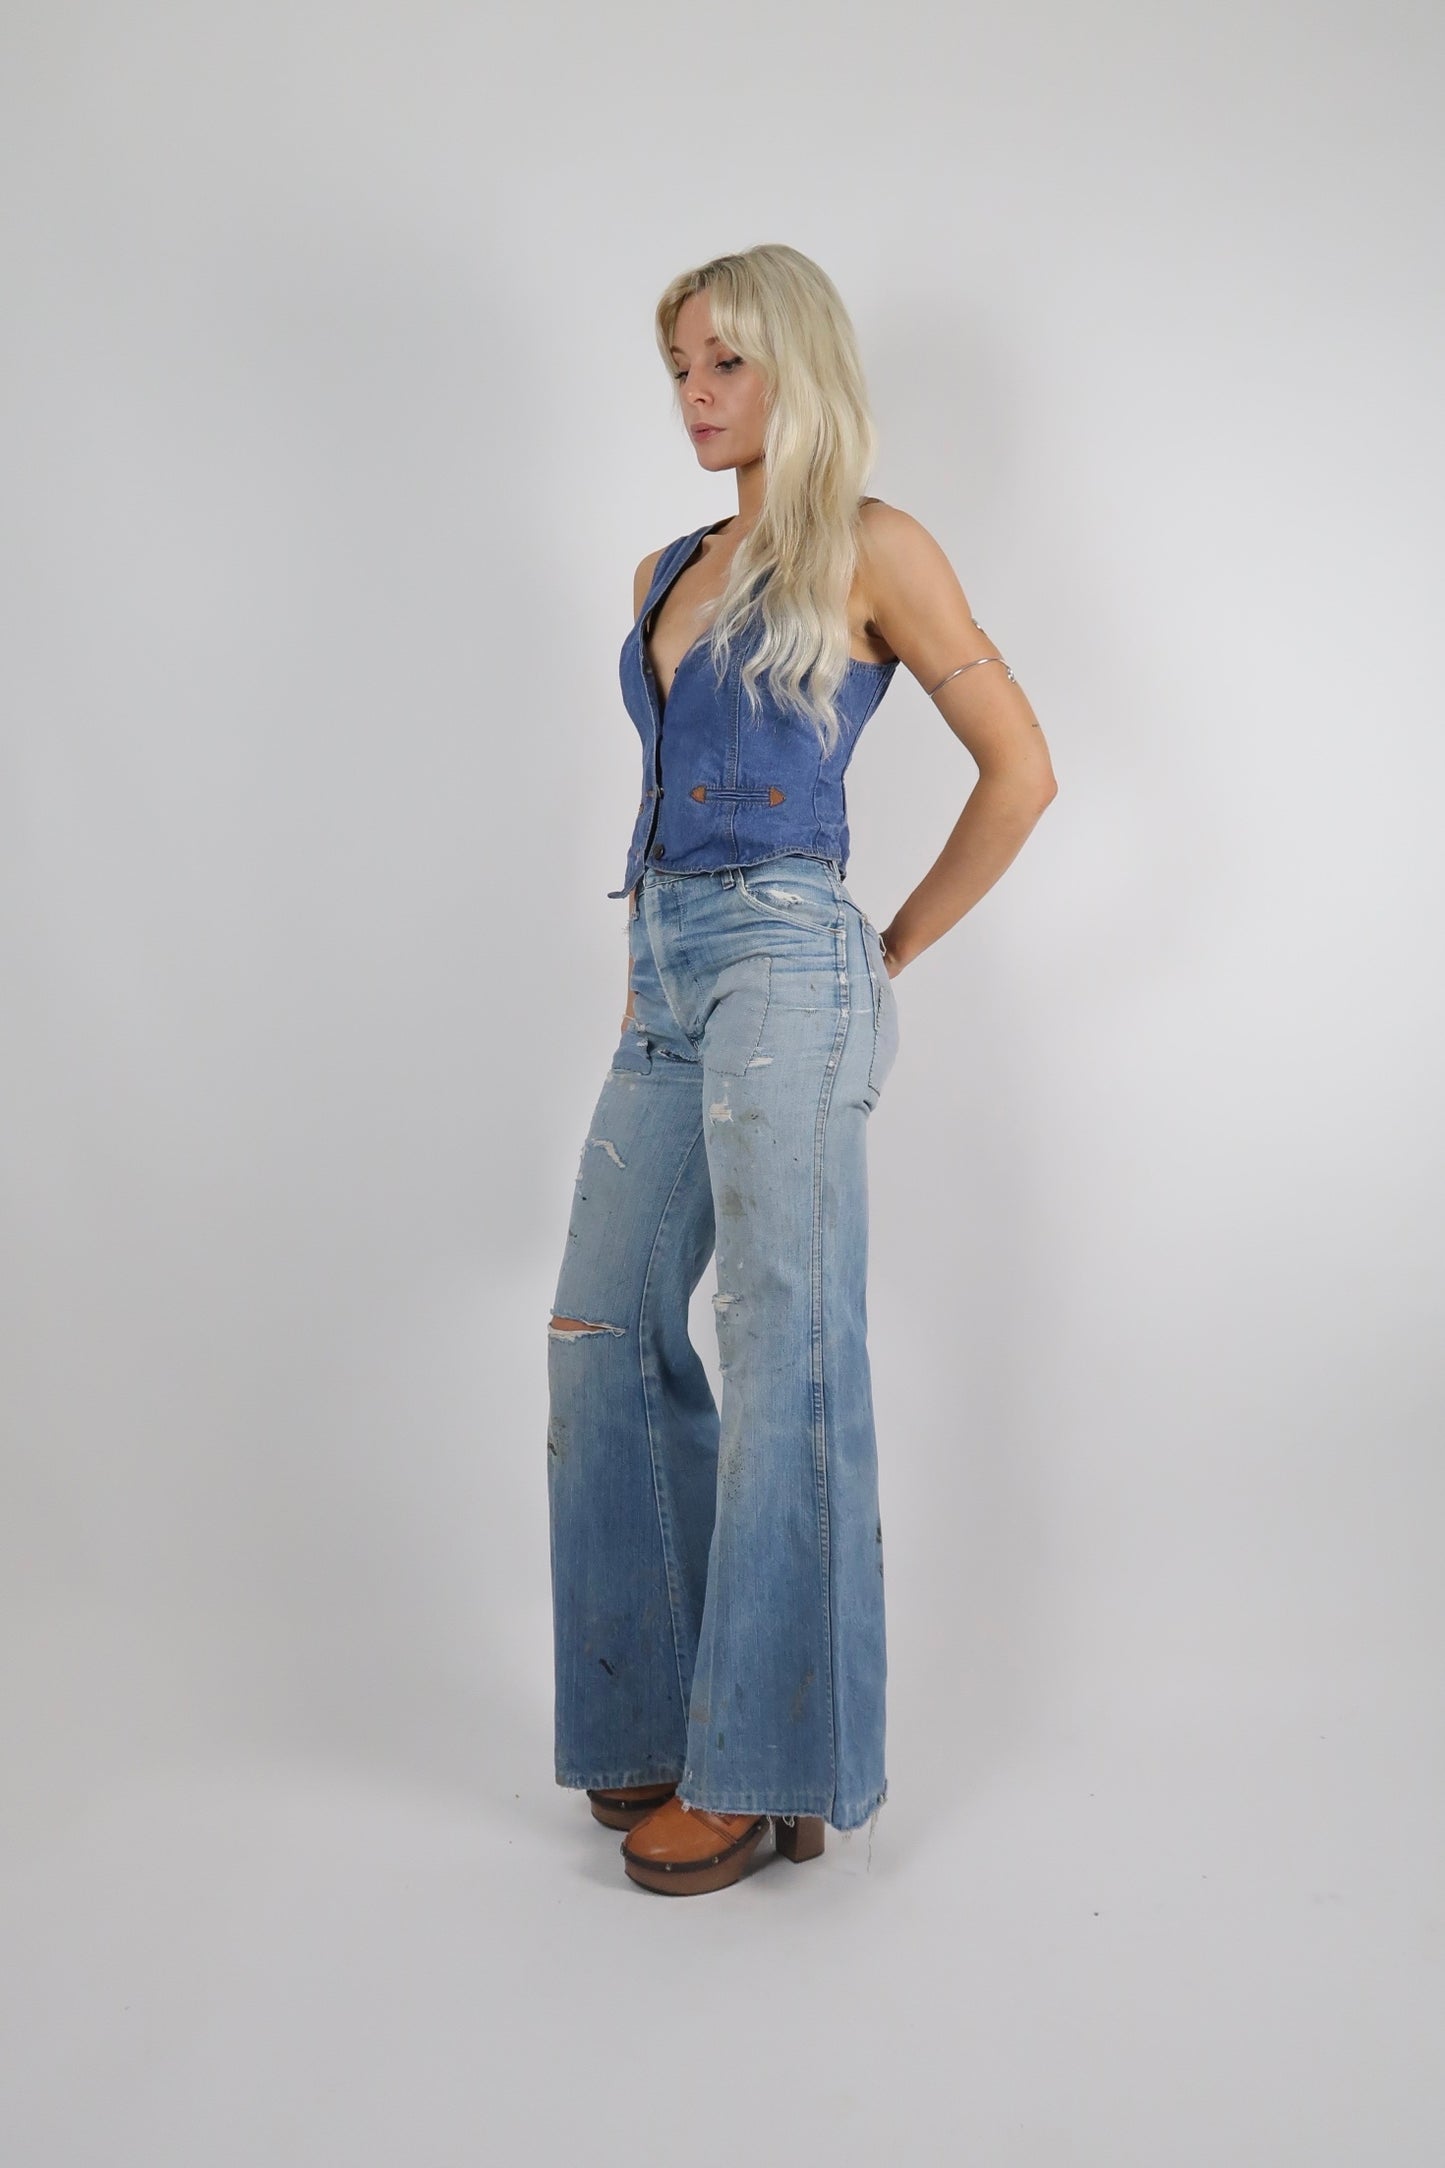 1970s beaten up patched bell bottoms